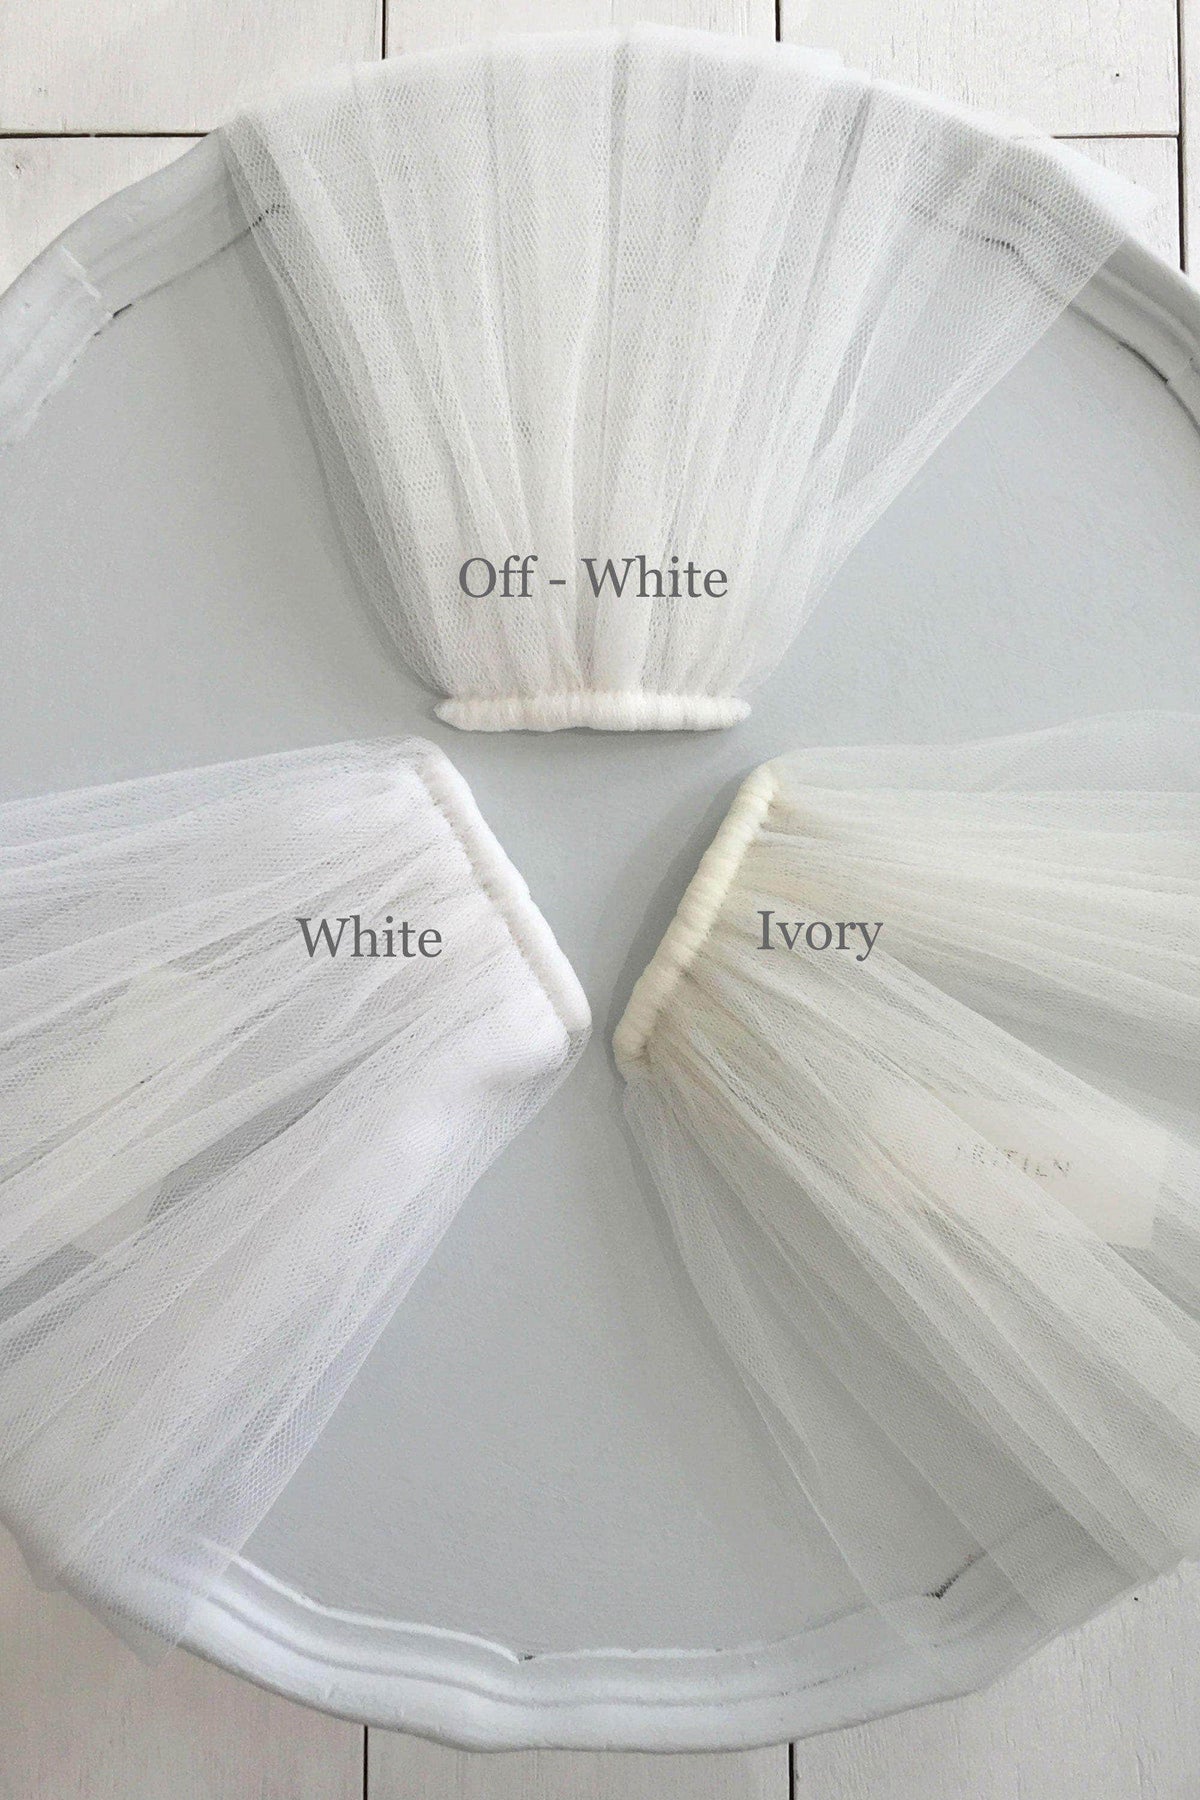 Veil swatch samples Off-white, white &amp; ivory Veil swatch samples - traditional tulle